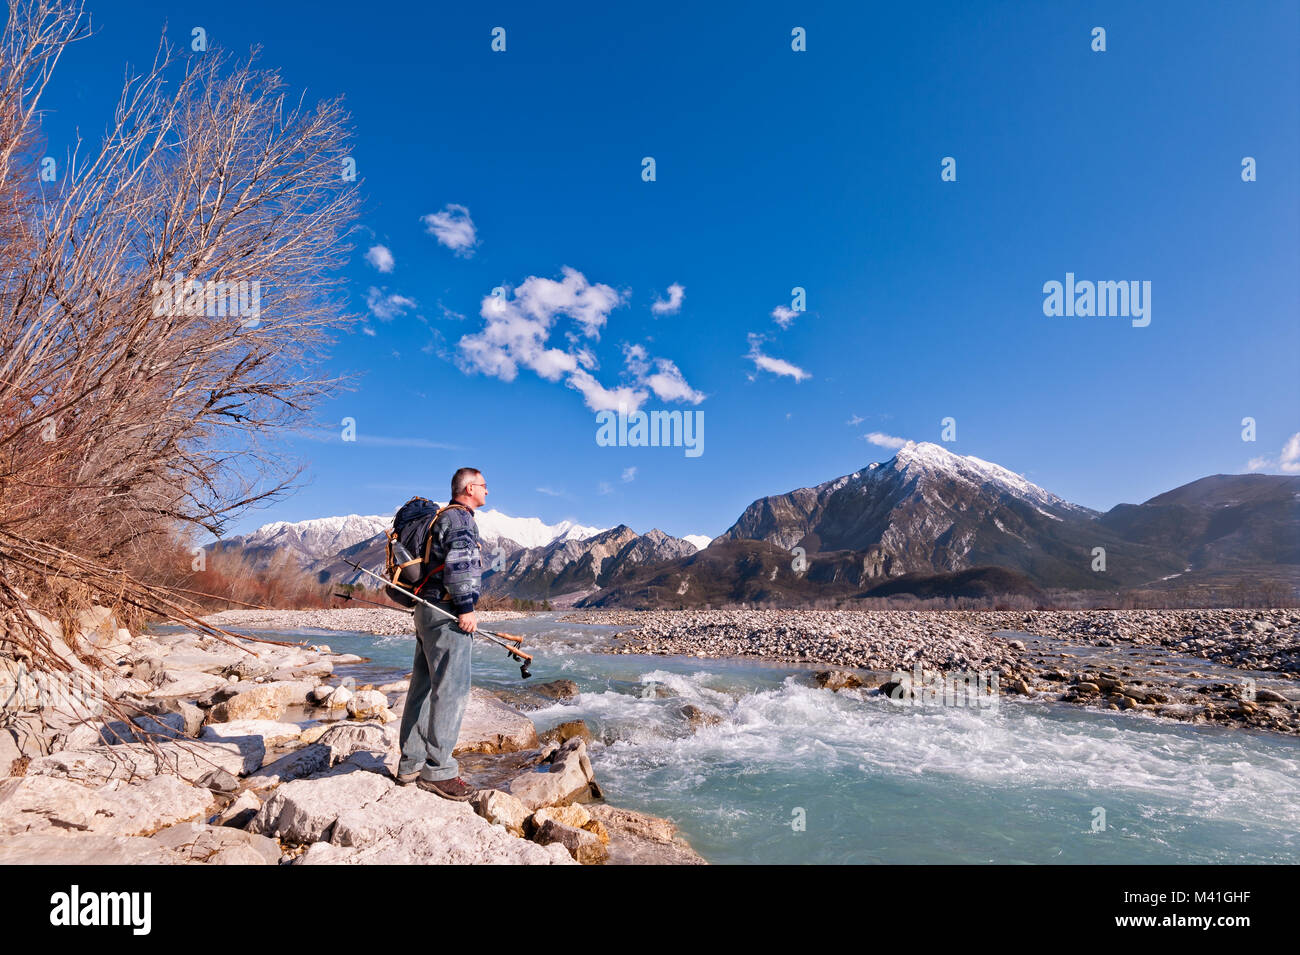 Hiker standing on river shore, looking the mountains landscape. Alps,Italy,Friuli. Stock Photo